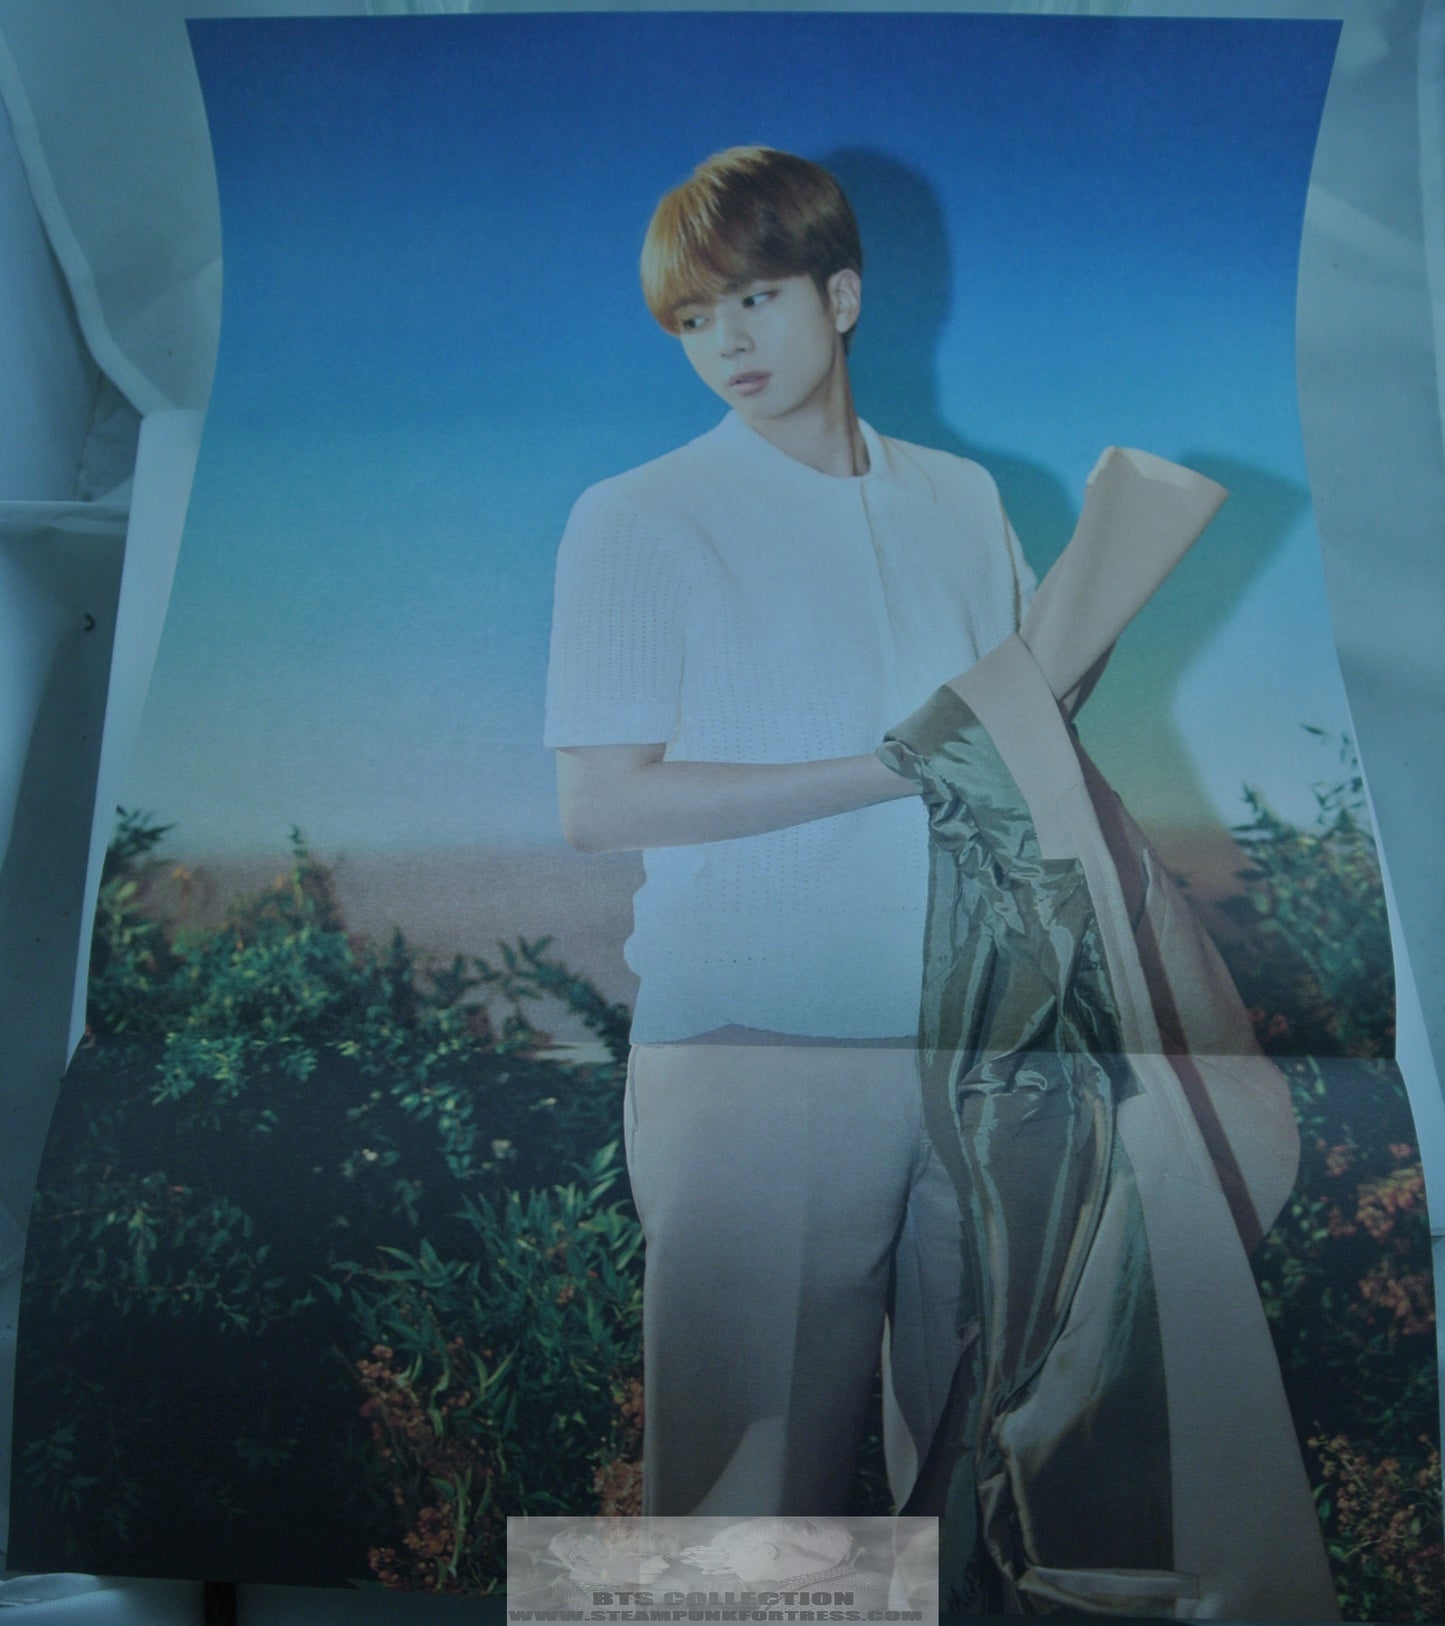 BTS JIN KIM SEOKJIN FOLDED POSTER CLOSE JACKET OFF COLOR 11.75" X 16.5" HYBE INSIGHT LIMITED EDITION OFFICIAL MERCHANDISE